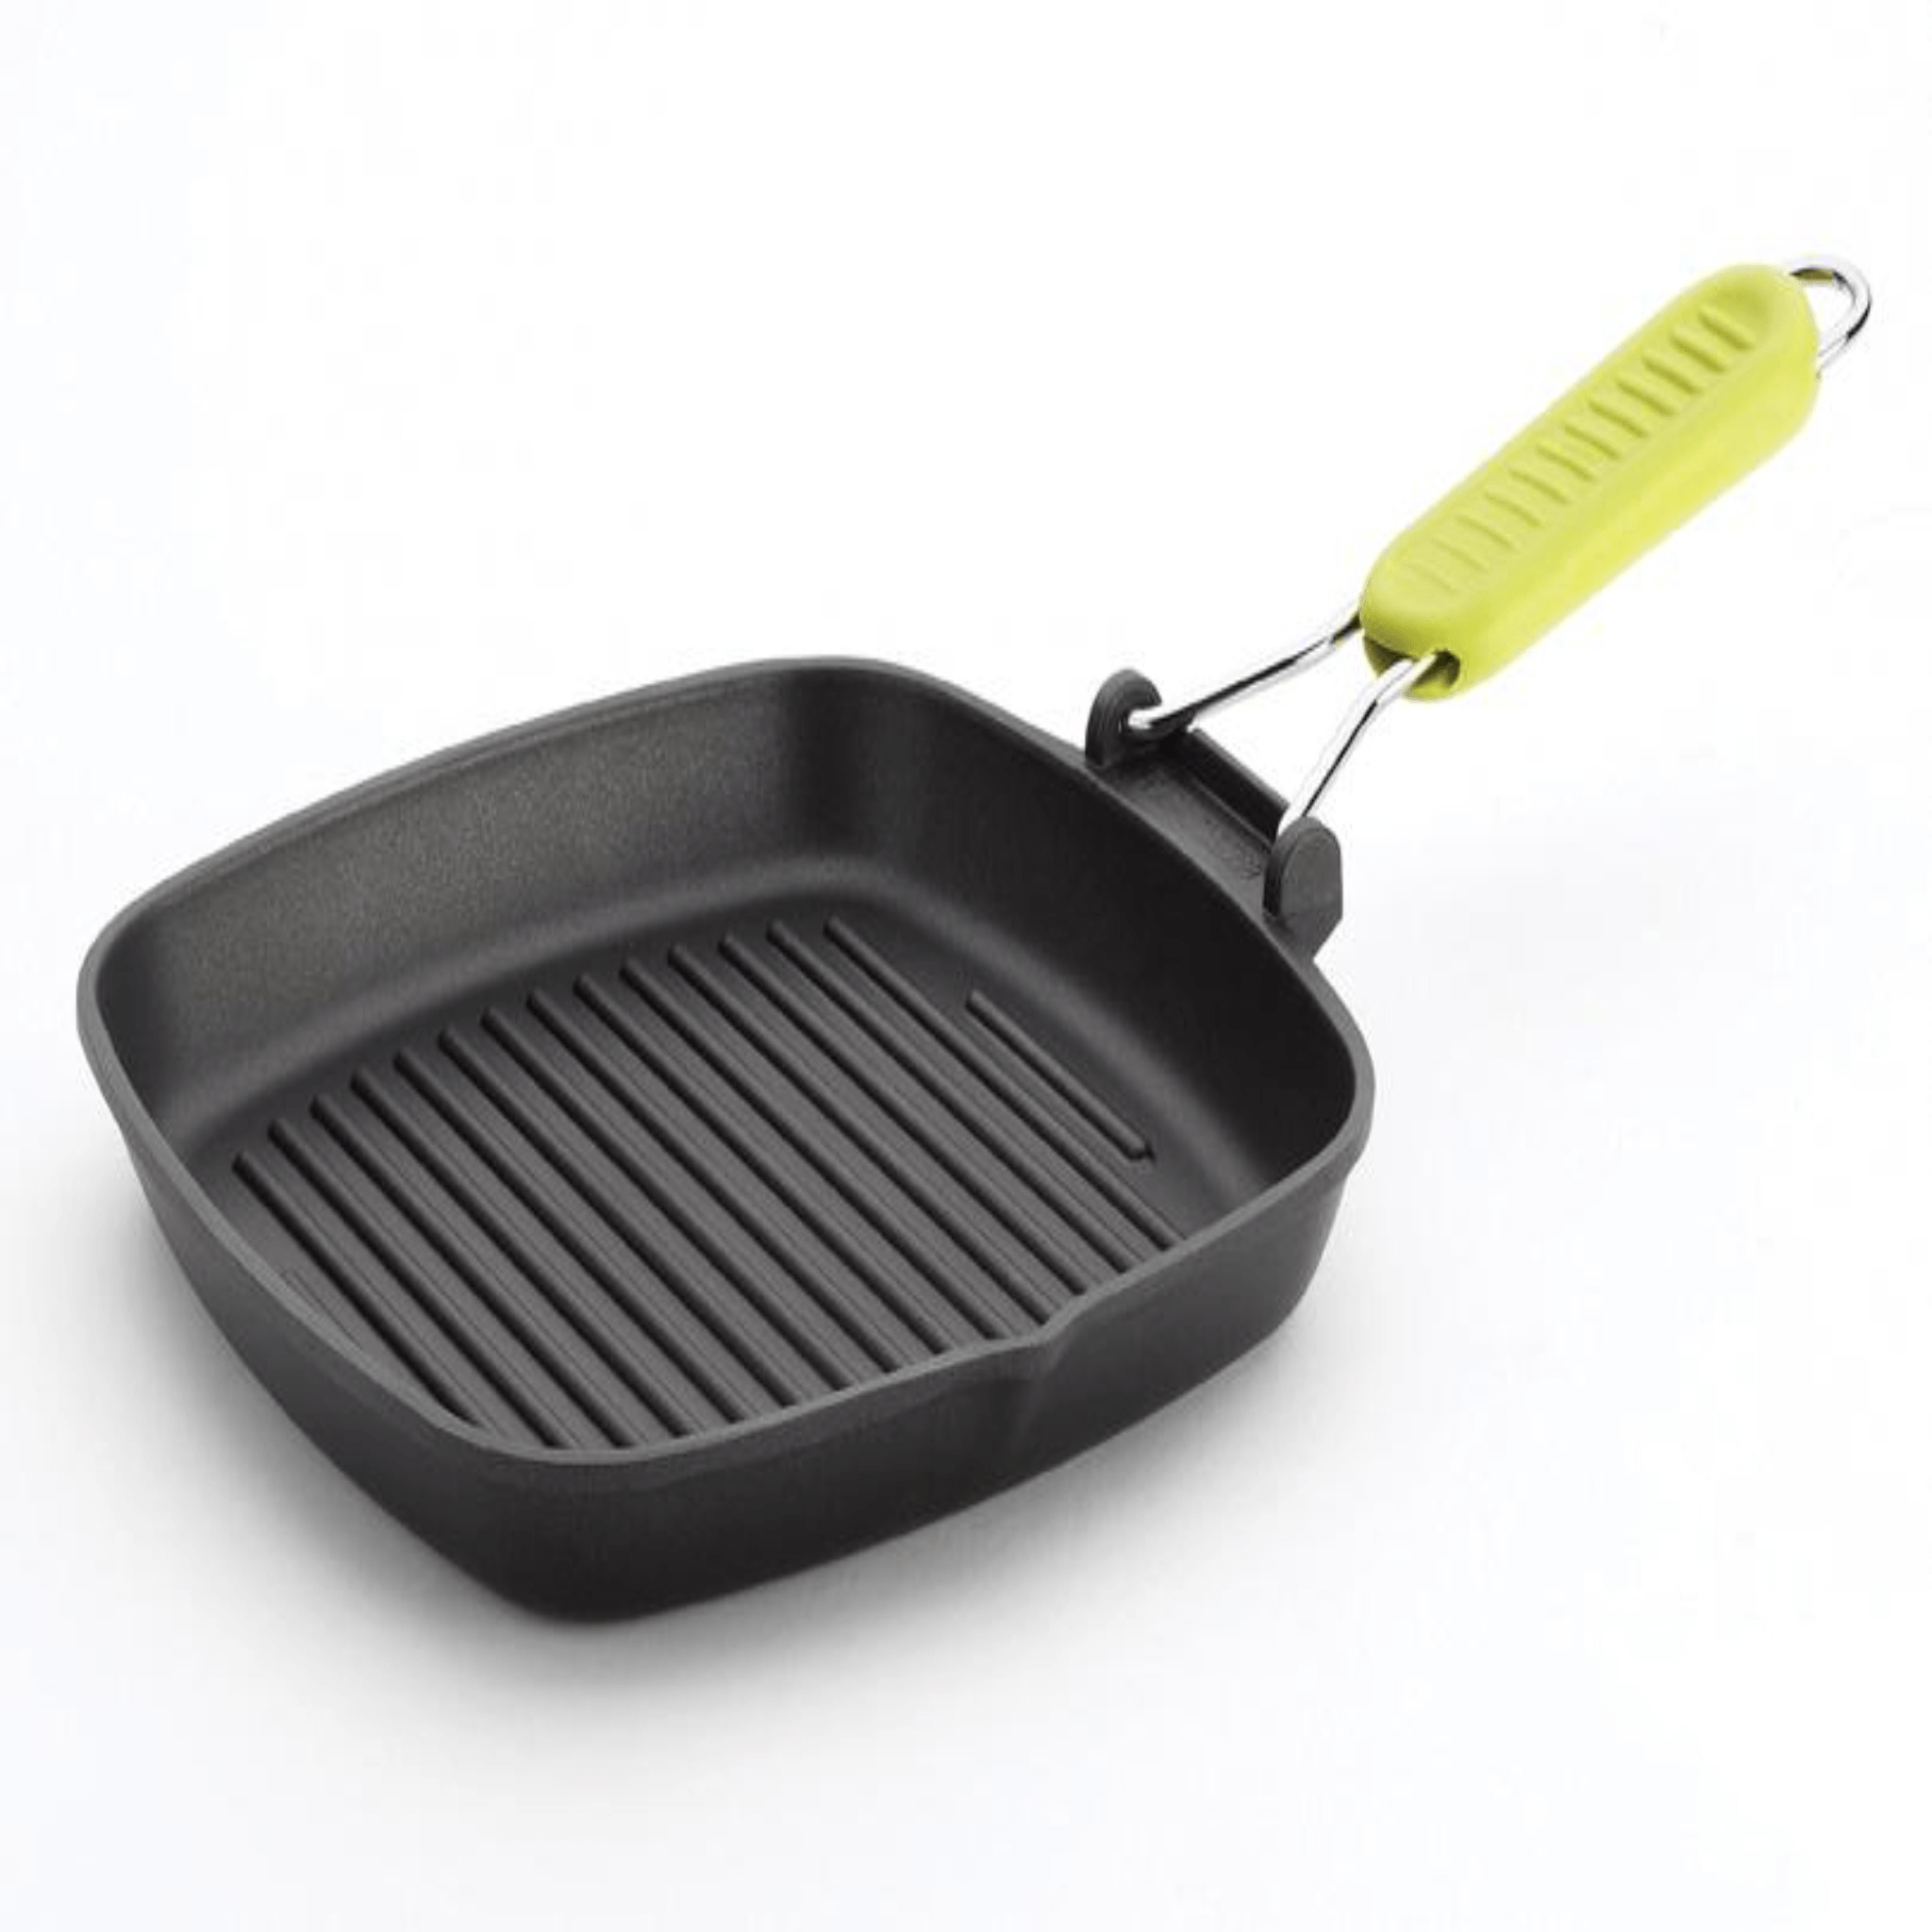 Risoli - Grill with Yellow Folding Handle - Black - Die Cast Aluminum - 36cm - 44000359